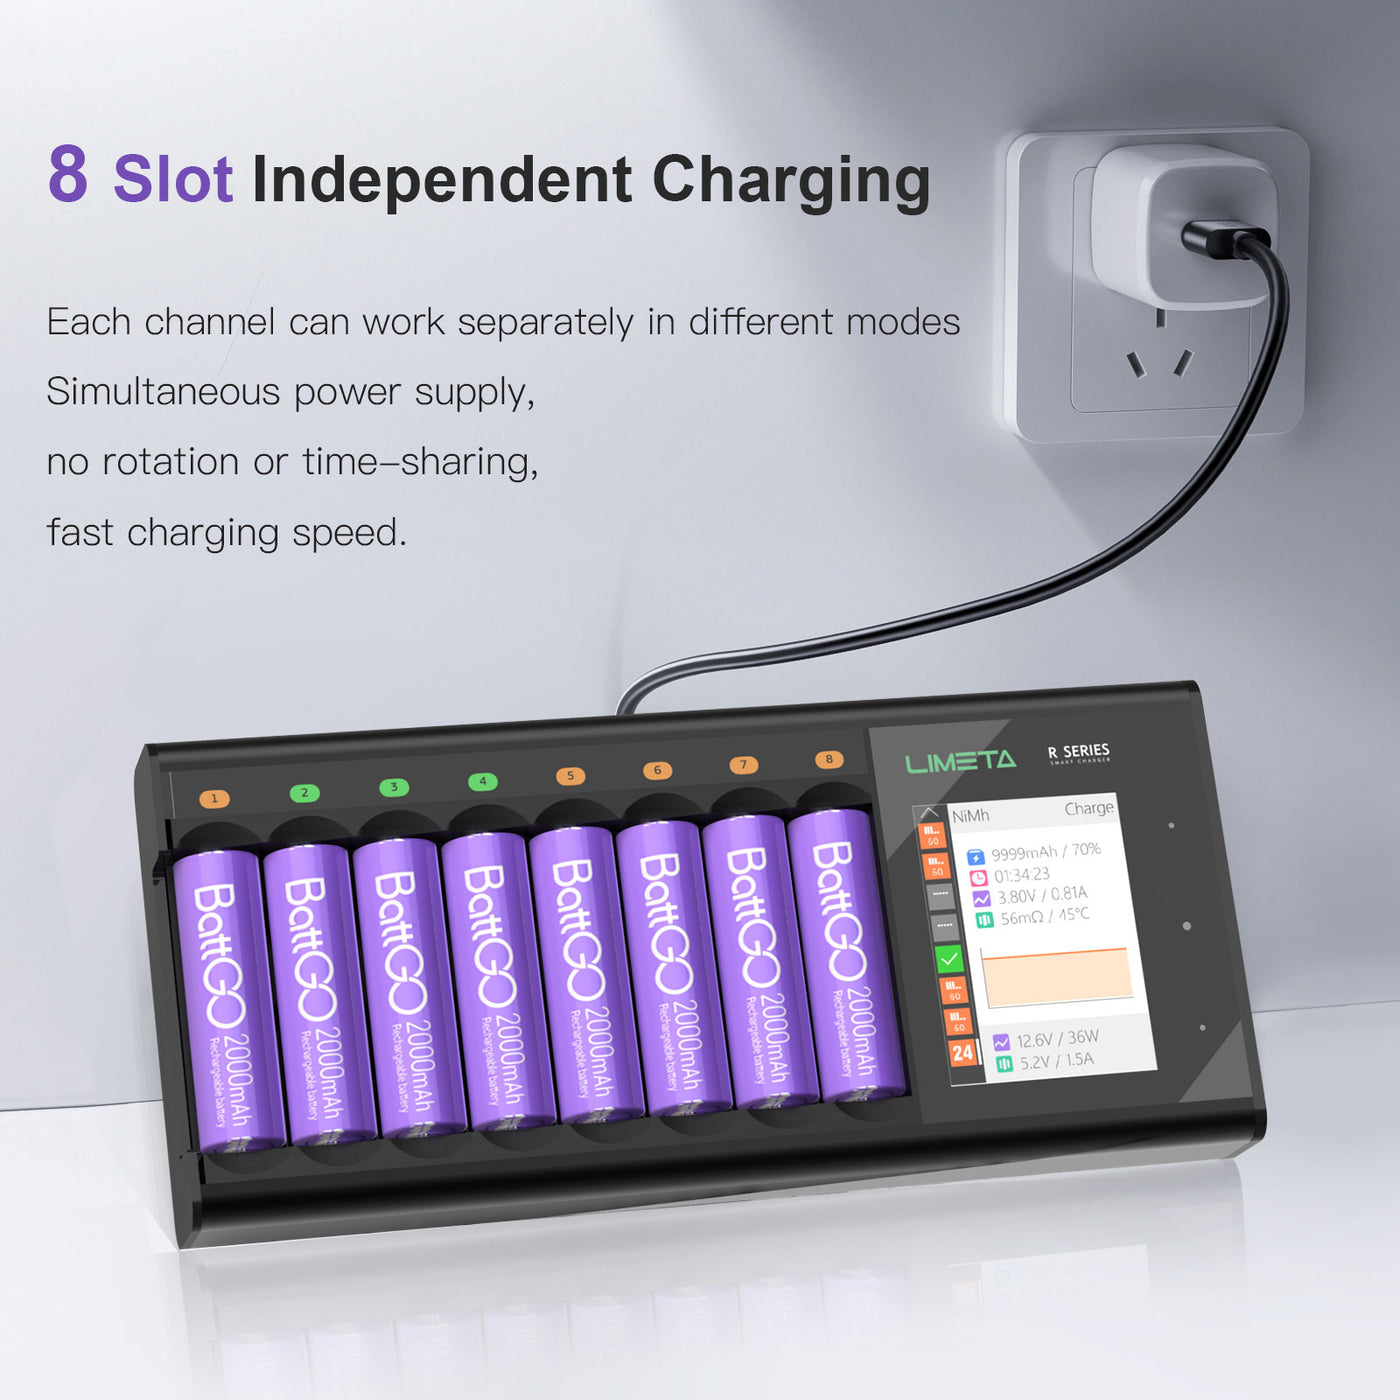 LIMETA AA AAA Universal Battery Charger 8-Slot,Speedy Smart Fast Charging Function with LCD Display,Type-C QC3.0 Output,Rechargeable Battery Charger for AA AAA Li-lon LiHv Ni-MH Ni-Cd LiFePO4